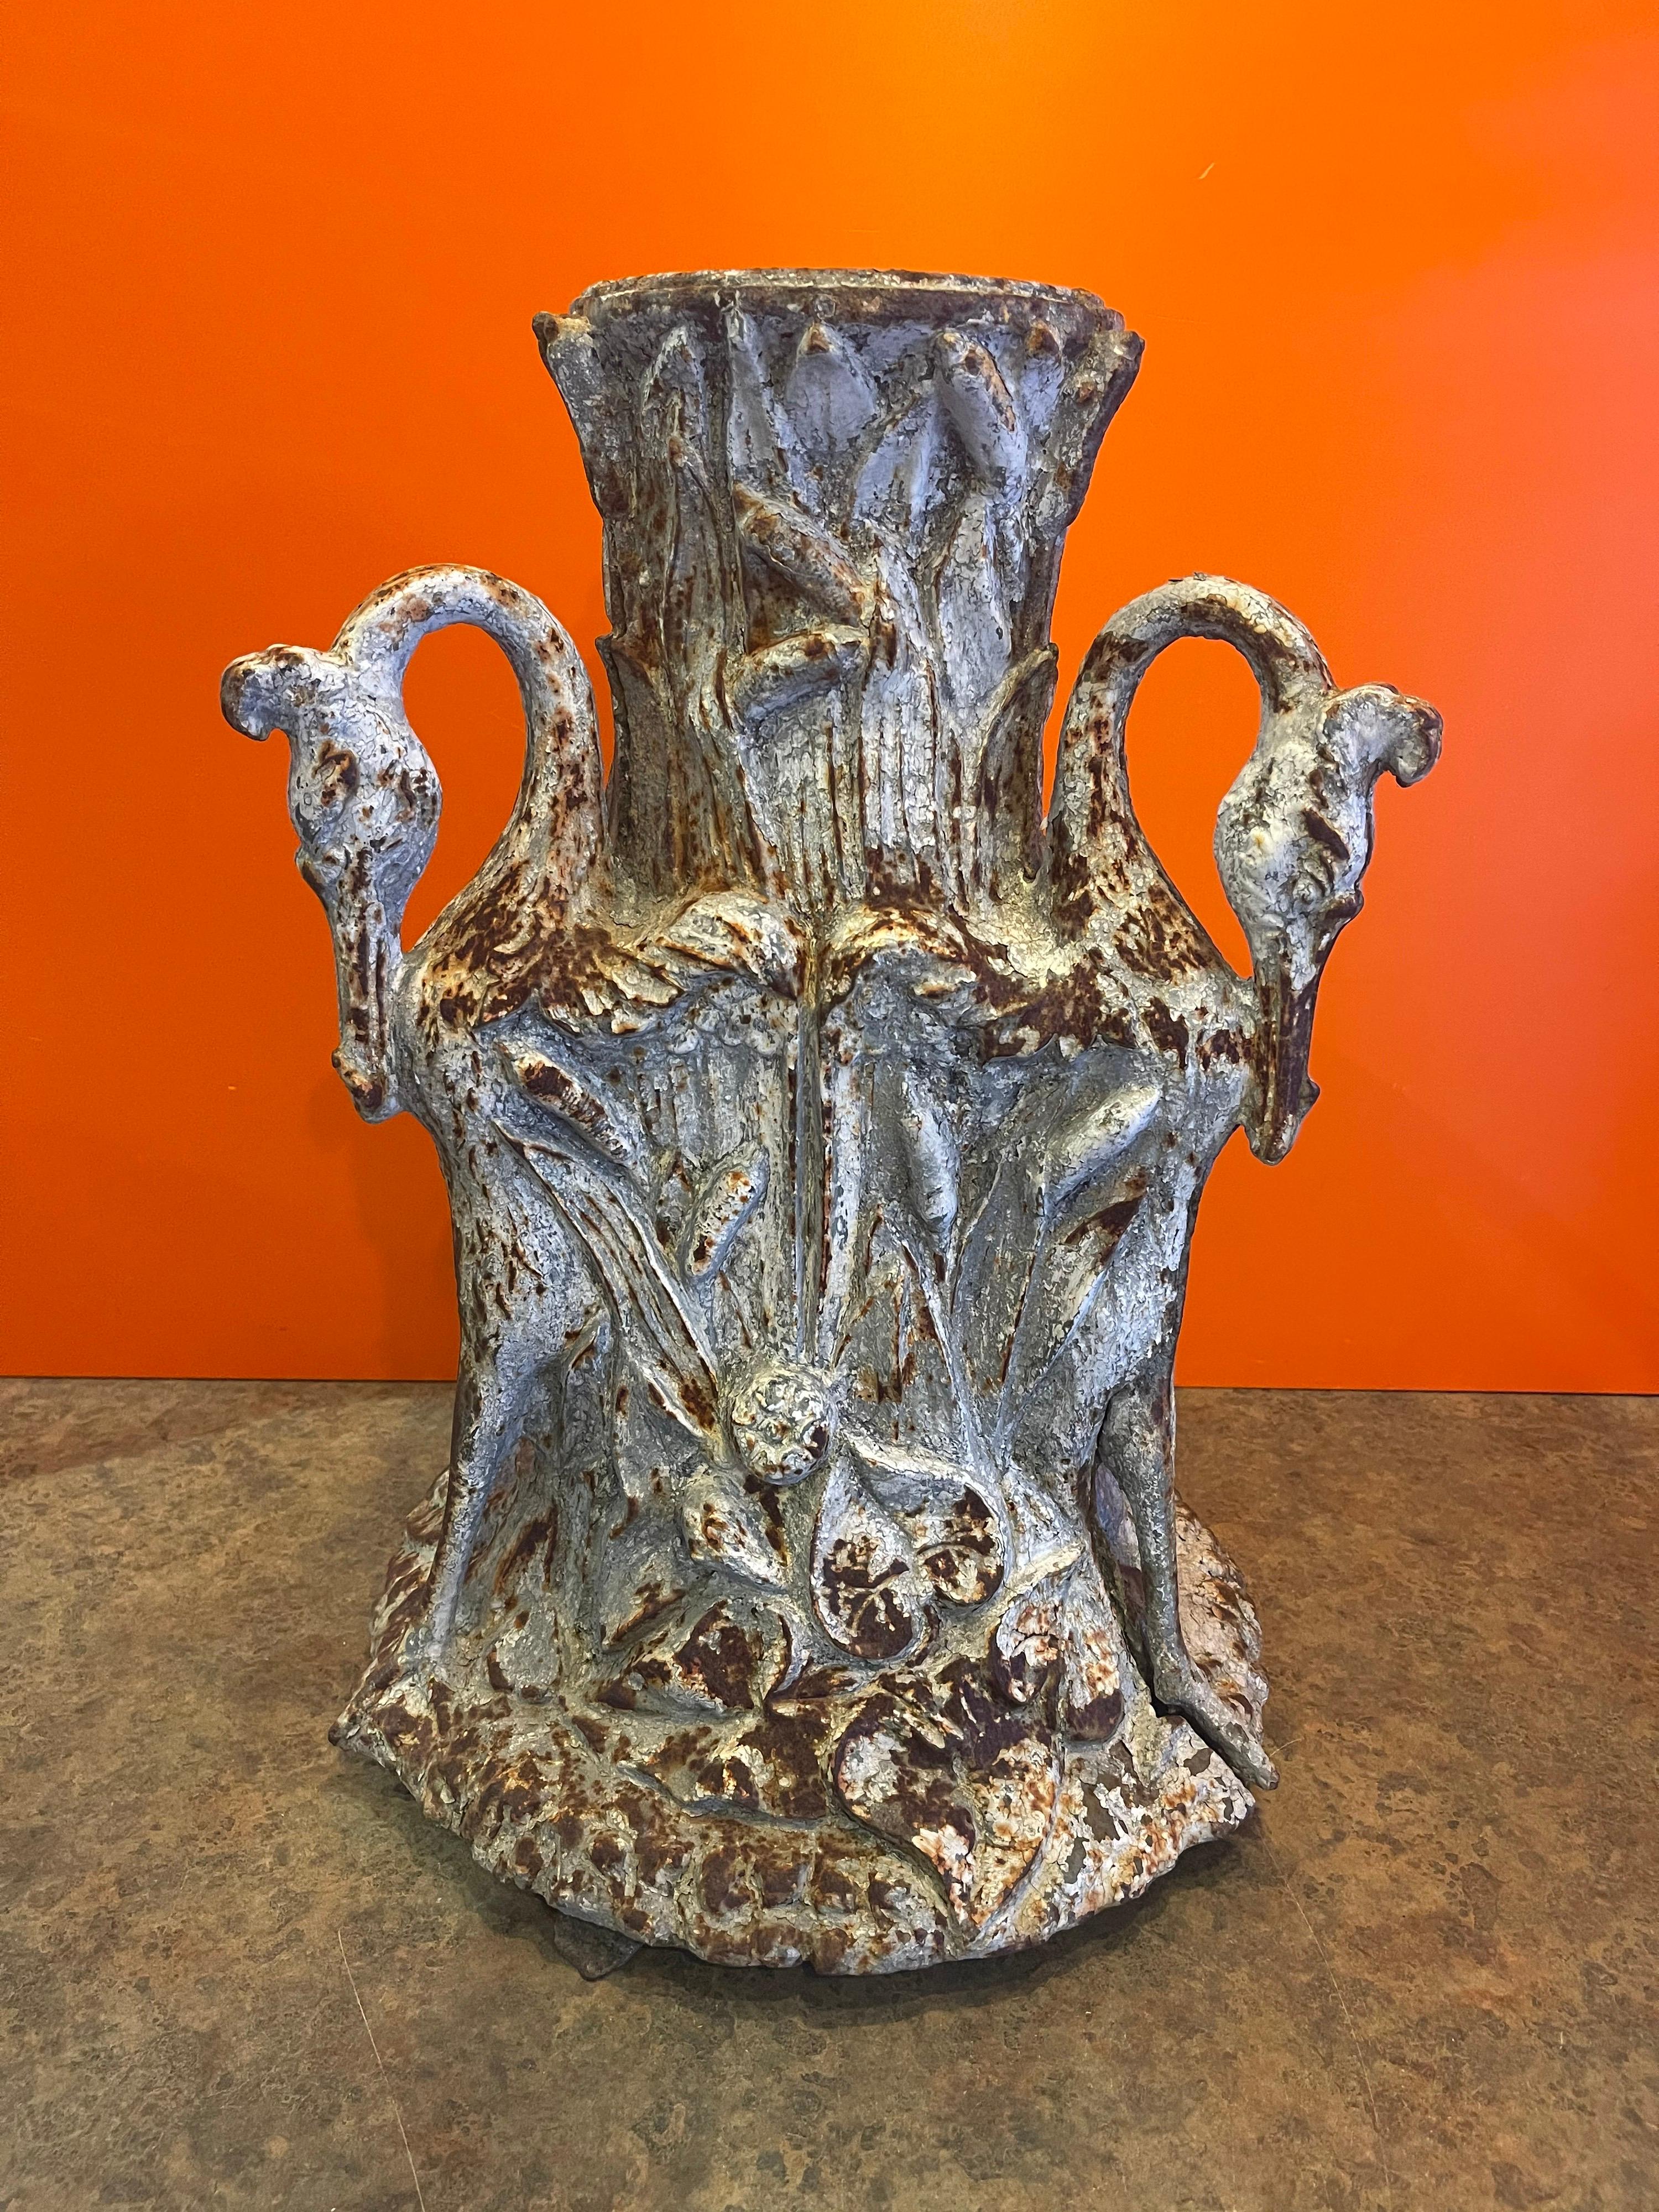 Rustic cast iron umbrella stand with swan accents, circa 1930s. The piece has a great patina, is quite heavy and measures 15